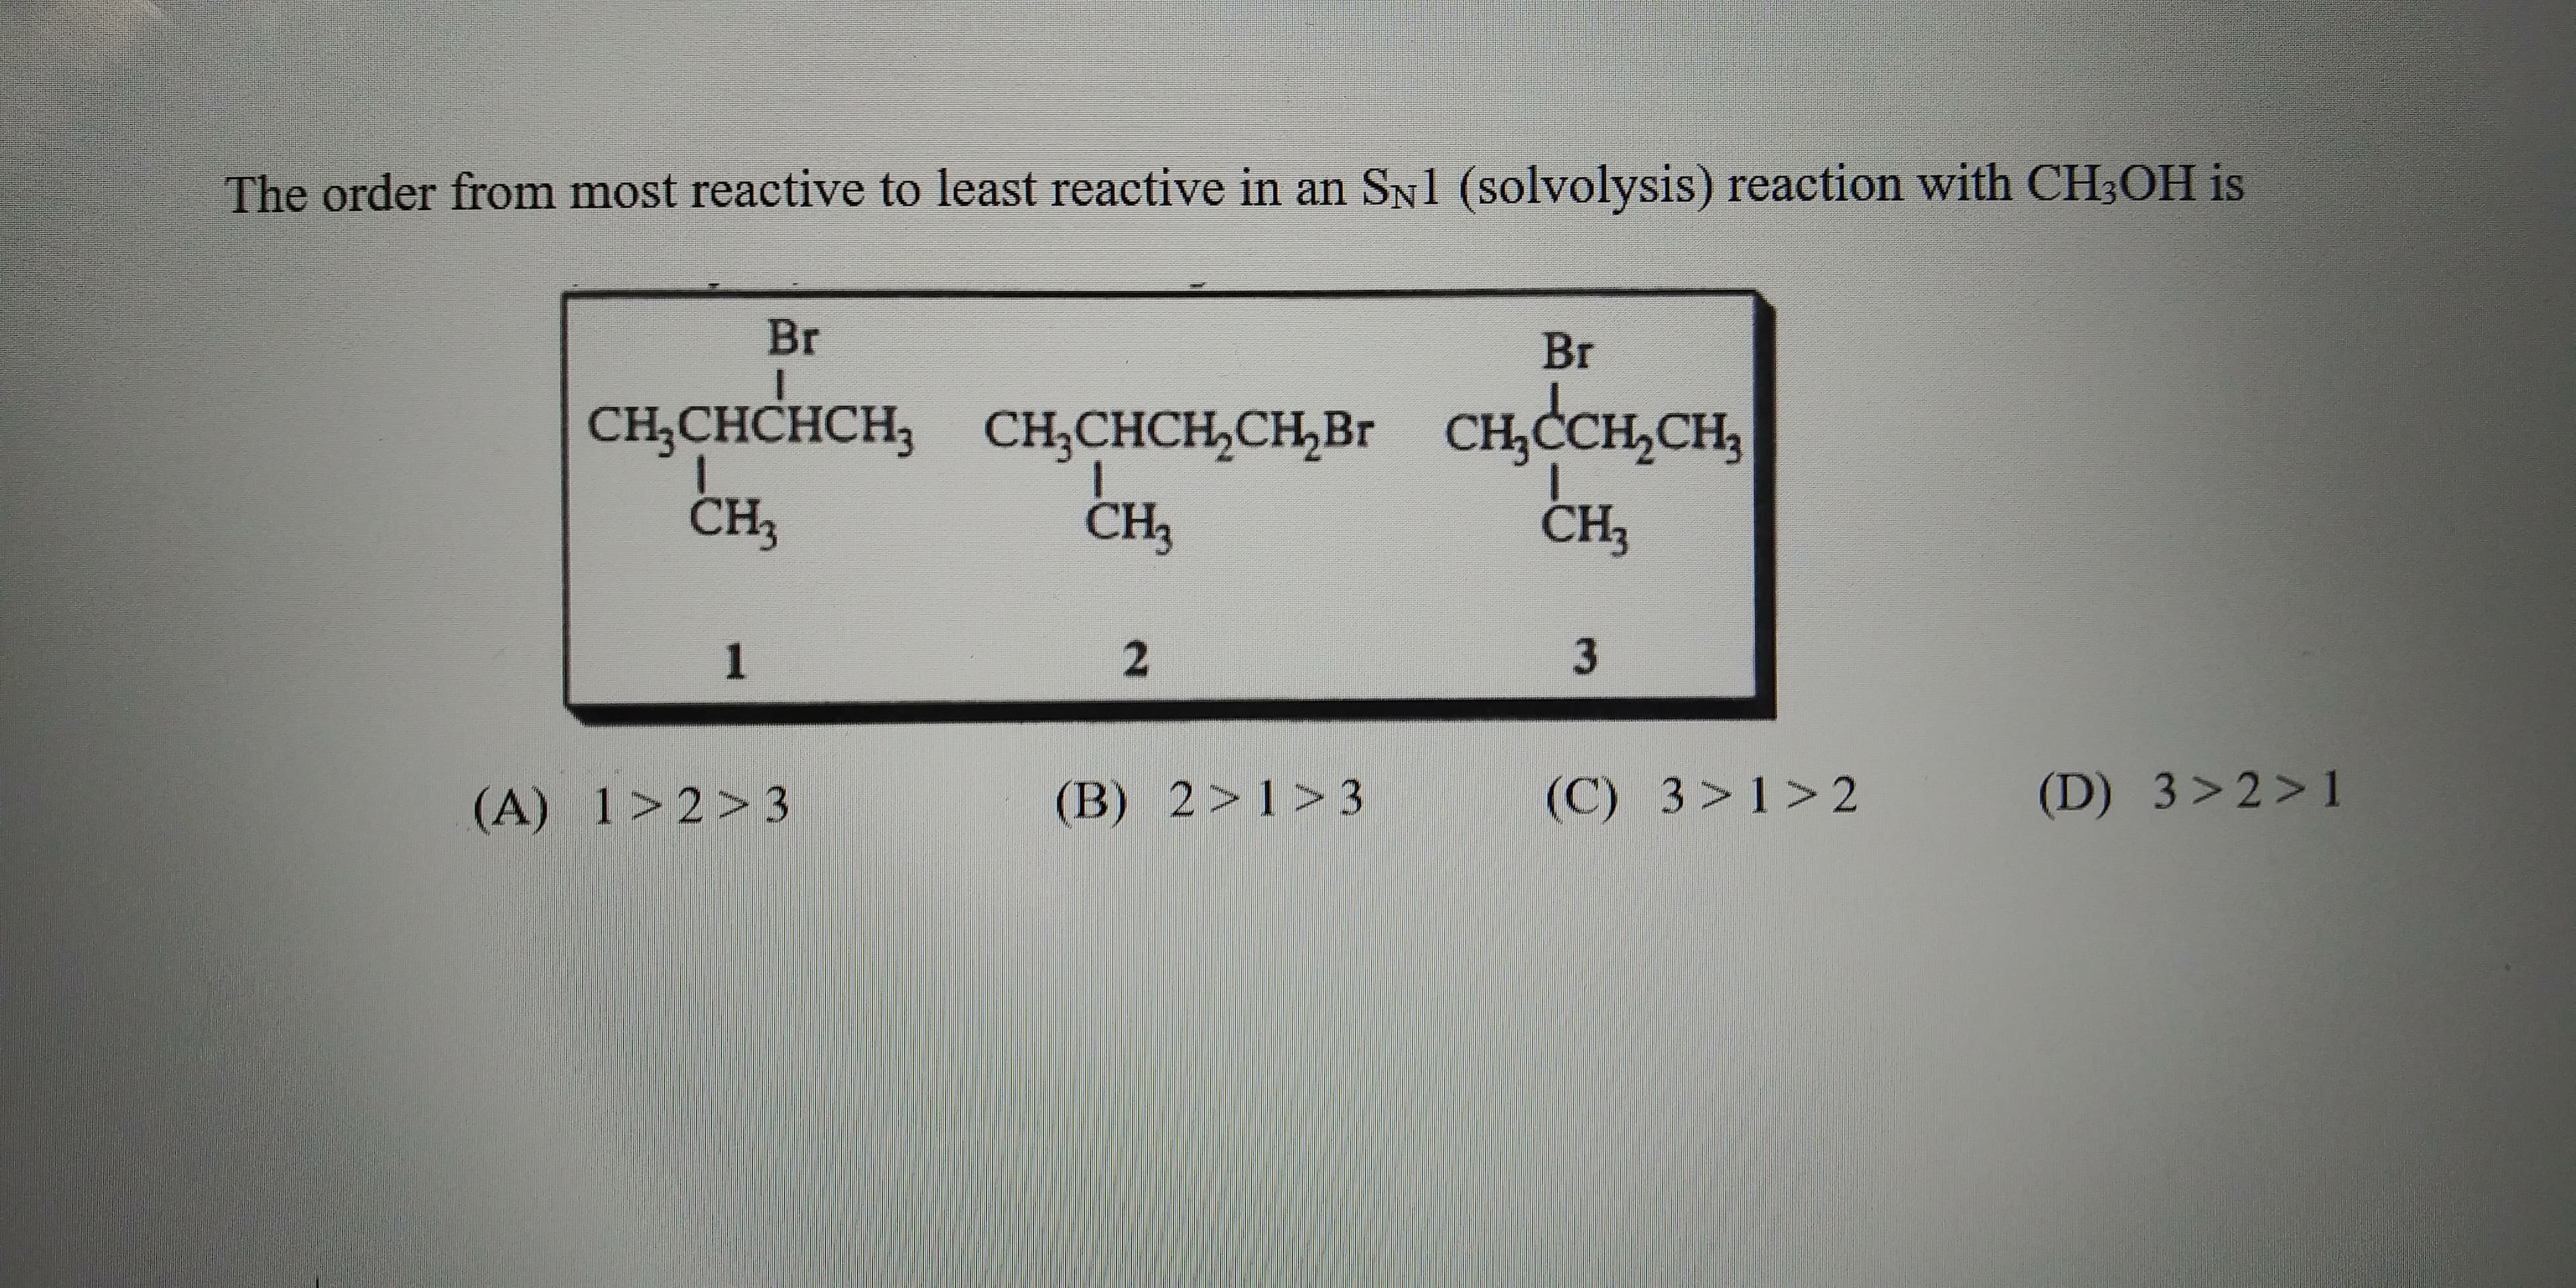 The order from most reactive to least reactive in an Sy1 (solvolysis) reaction with CIIOII is
Br
Br
CH CHCHCH, сн,СНСH, CH, Br CH,СсH,CH,
сн,
CH,
CH,
3
(A) 1>2> 3
(B) 2>1>3
(C) 3>1>2
(D) 3> 2 >1
